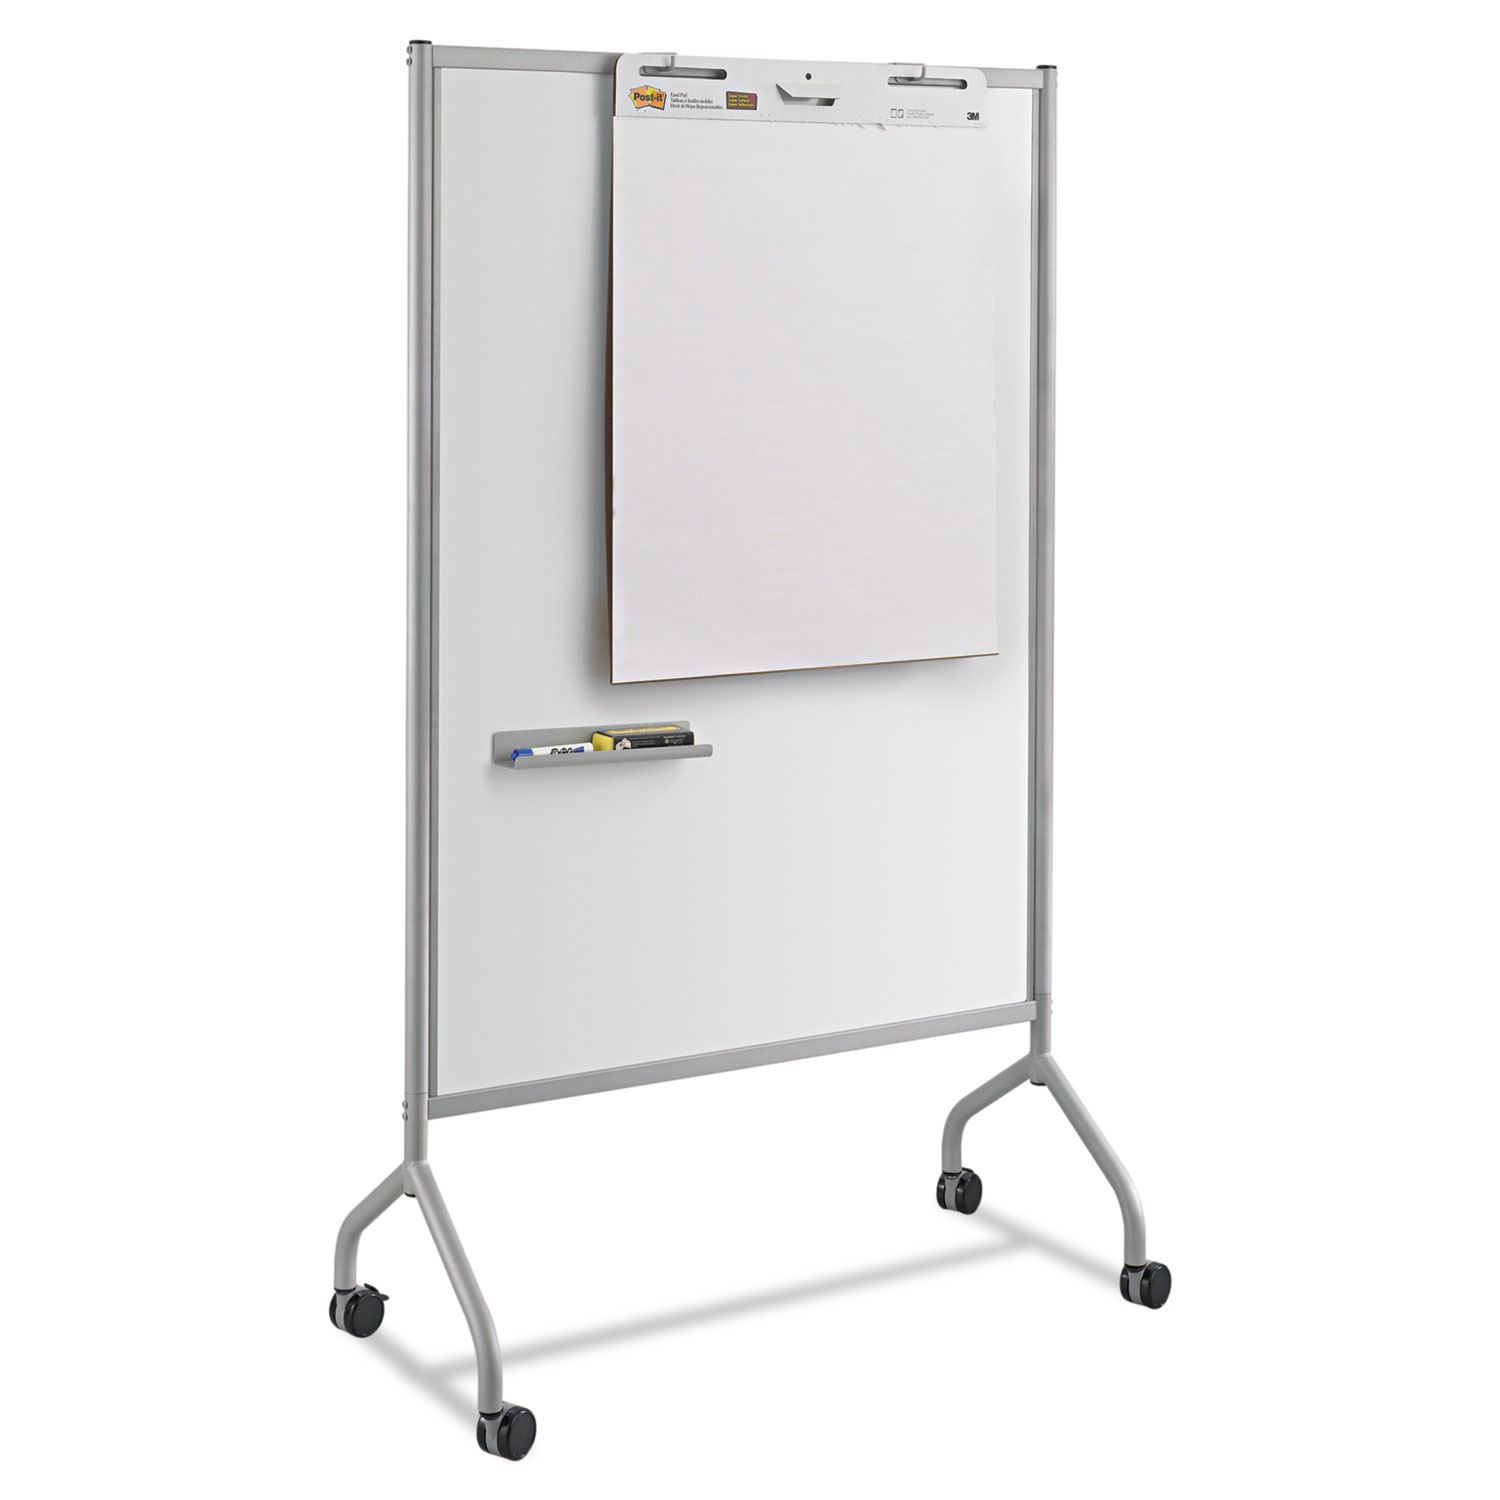  Safco 8511GR Impromptu Magnetic Whiteboard Collaboration Screen, 42w x 21.5d x 72h, Gray/White (SAF8511GR) 